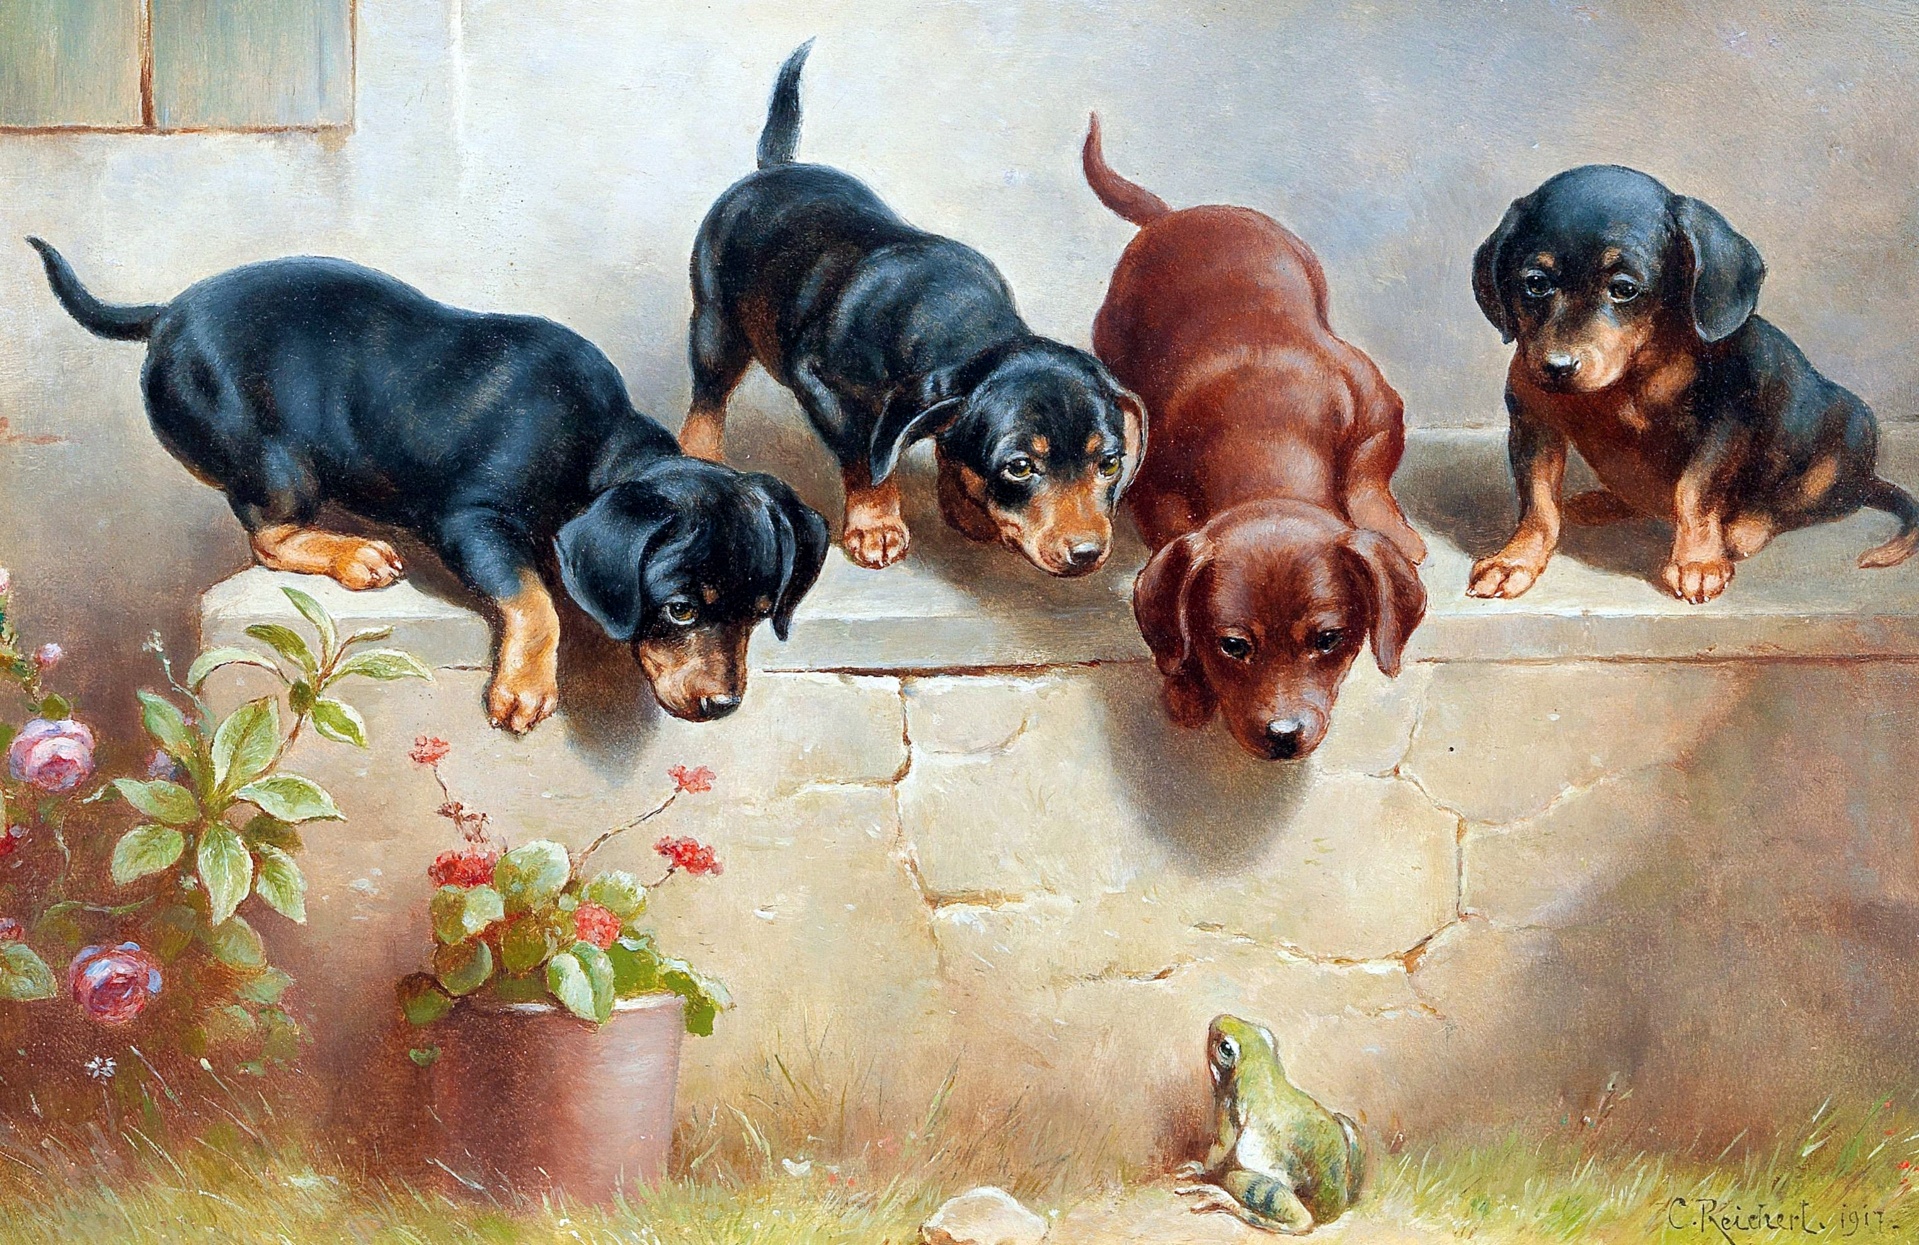 Dogs puppies dachshund vintage illustration old antique painting painting by Reichert from 1889